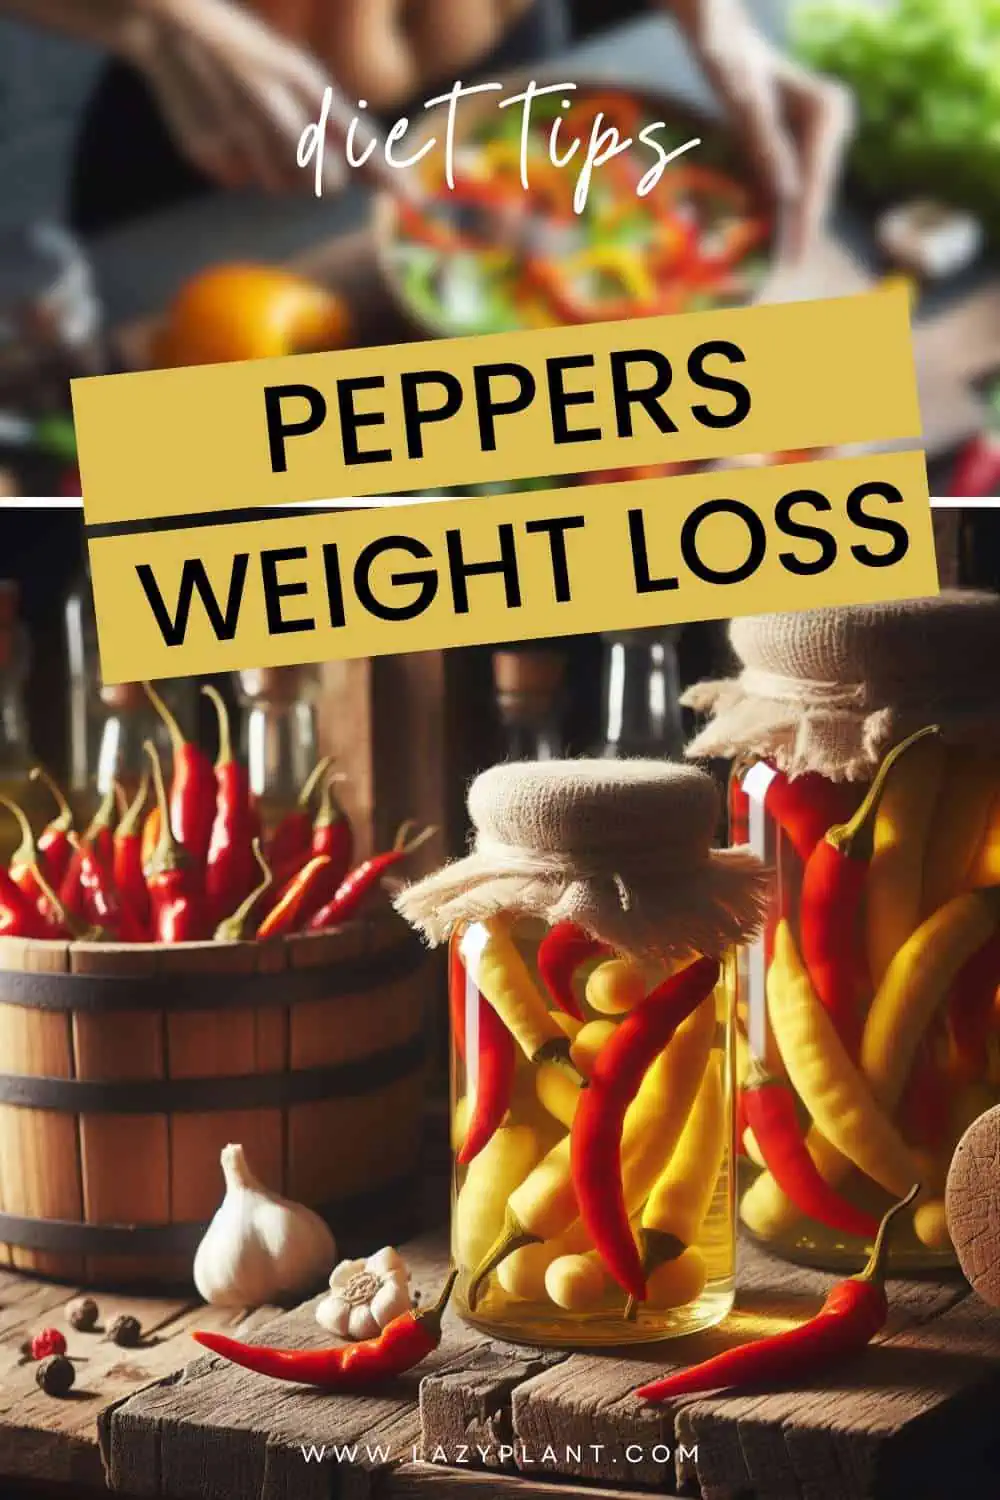 Benefits of eating peppers for Weight Loss.